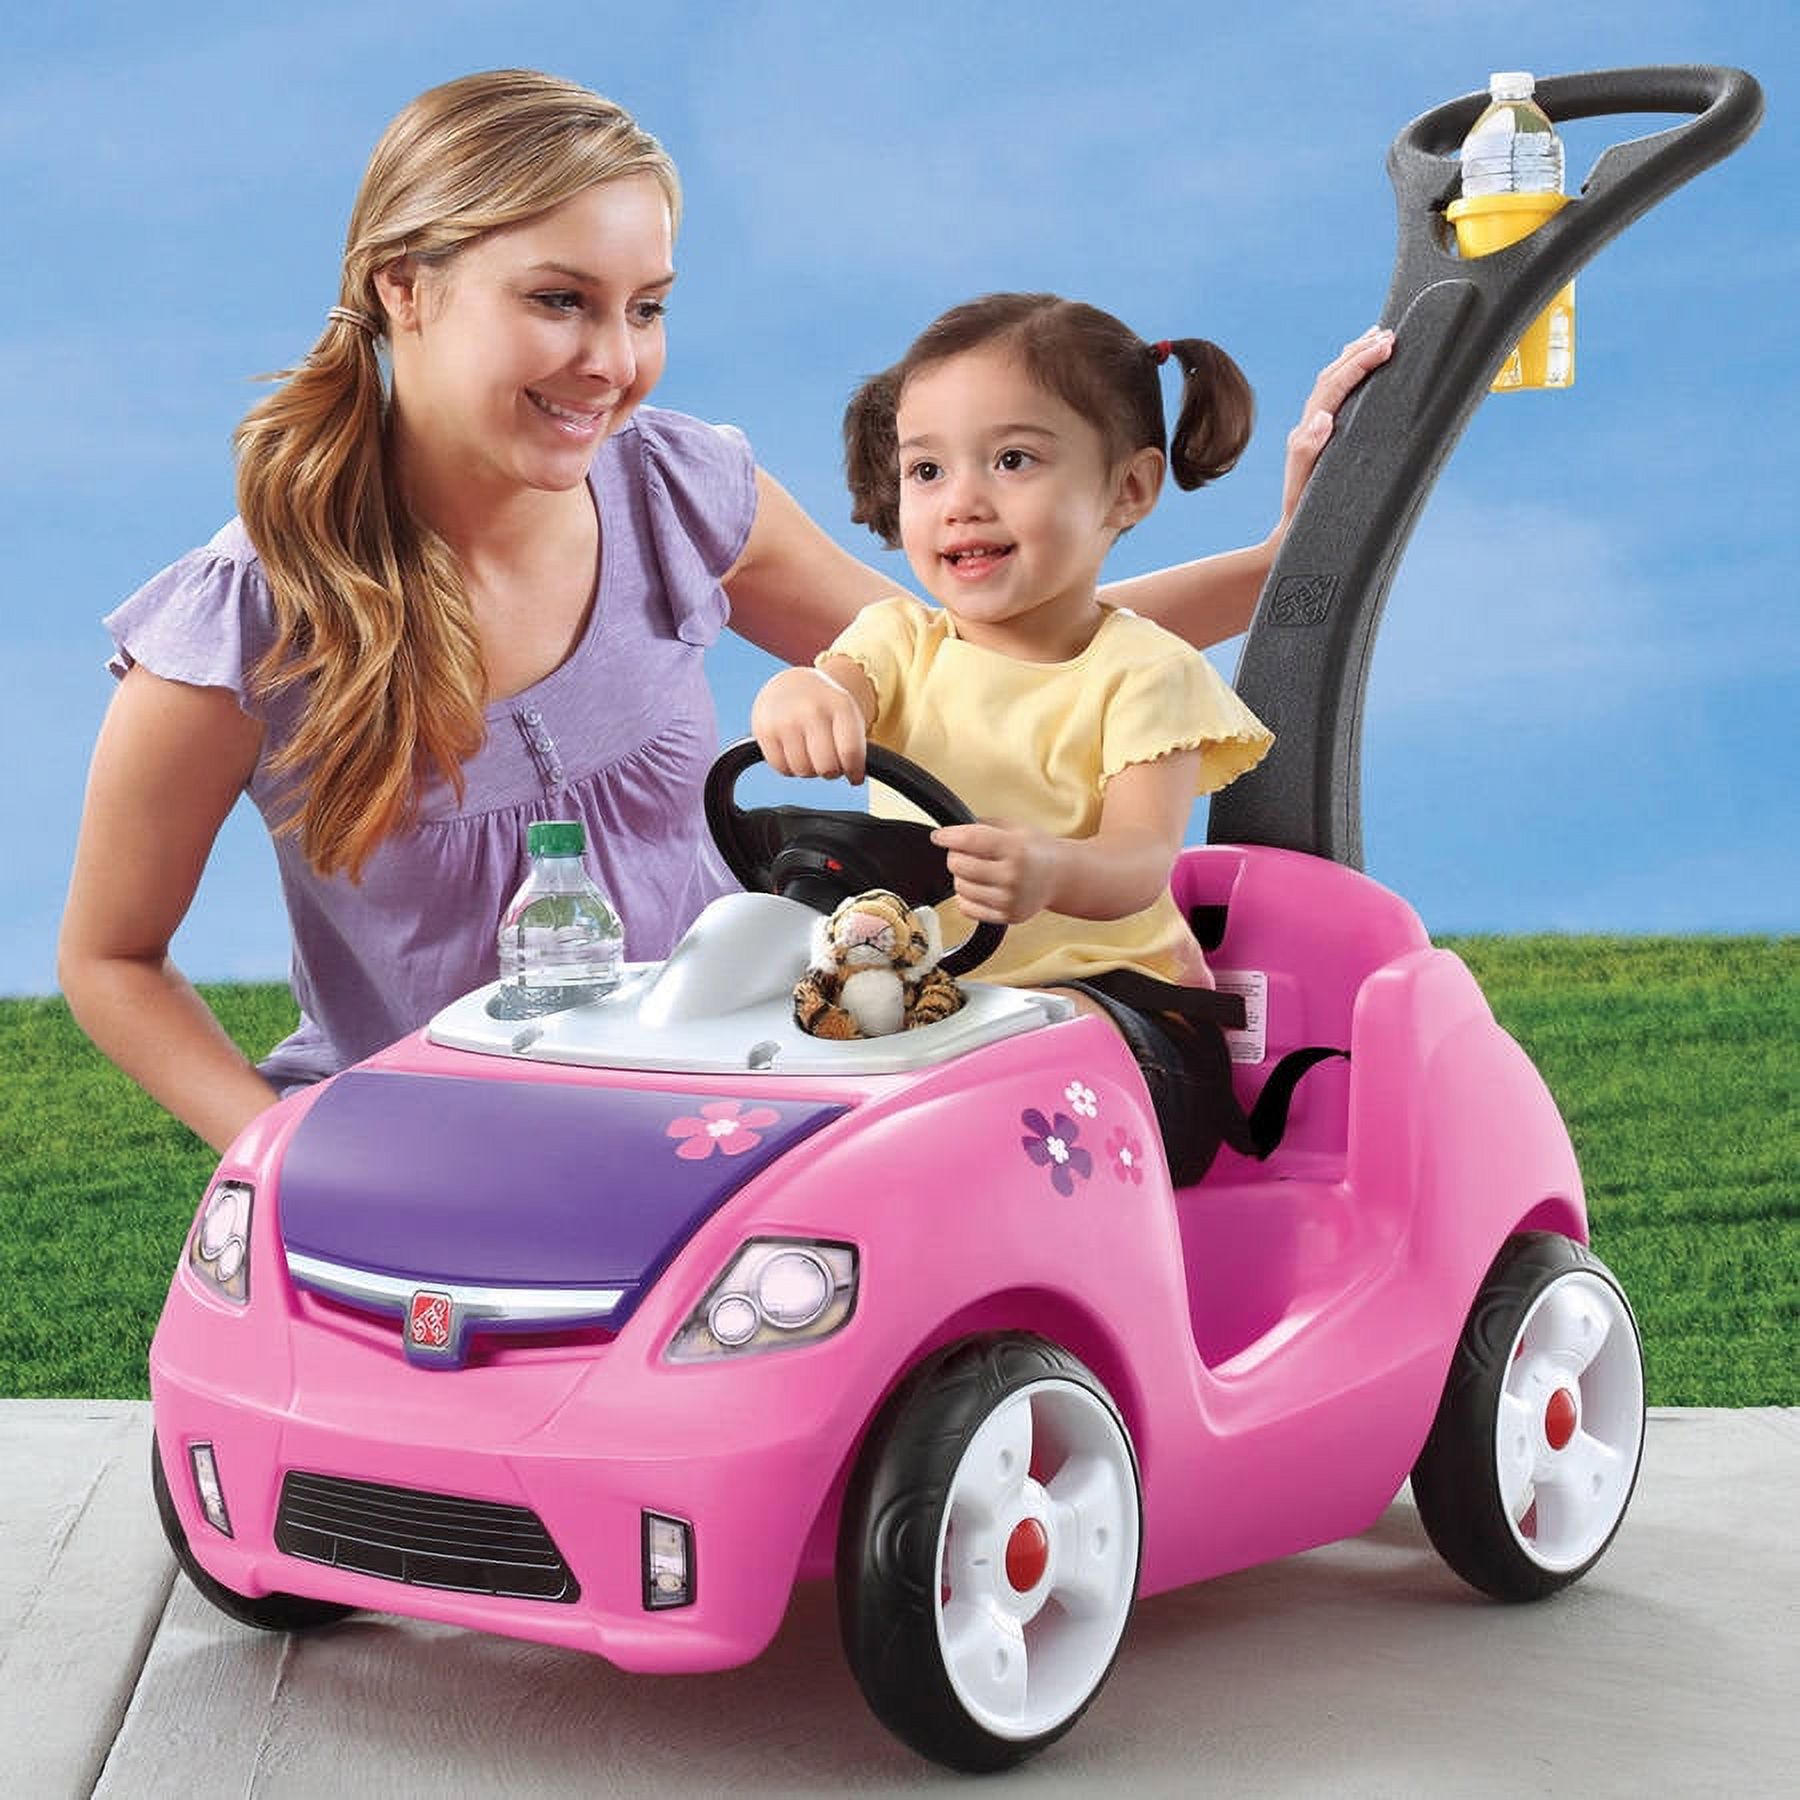 Step2 Whisper Ride II Pink Kids Push Car and Ride on Toy for Toddlers - image 3 of 8